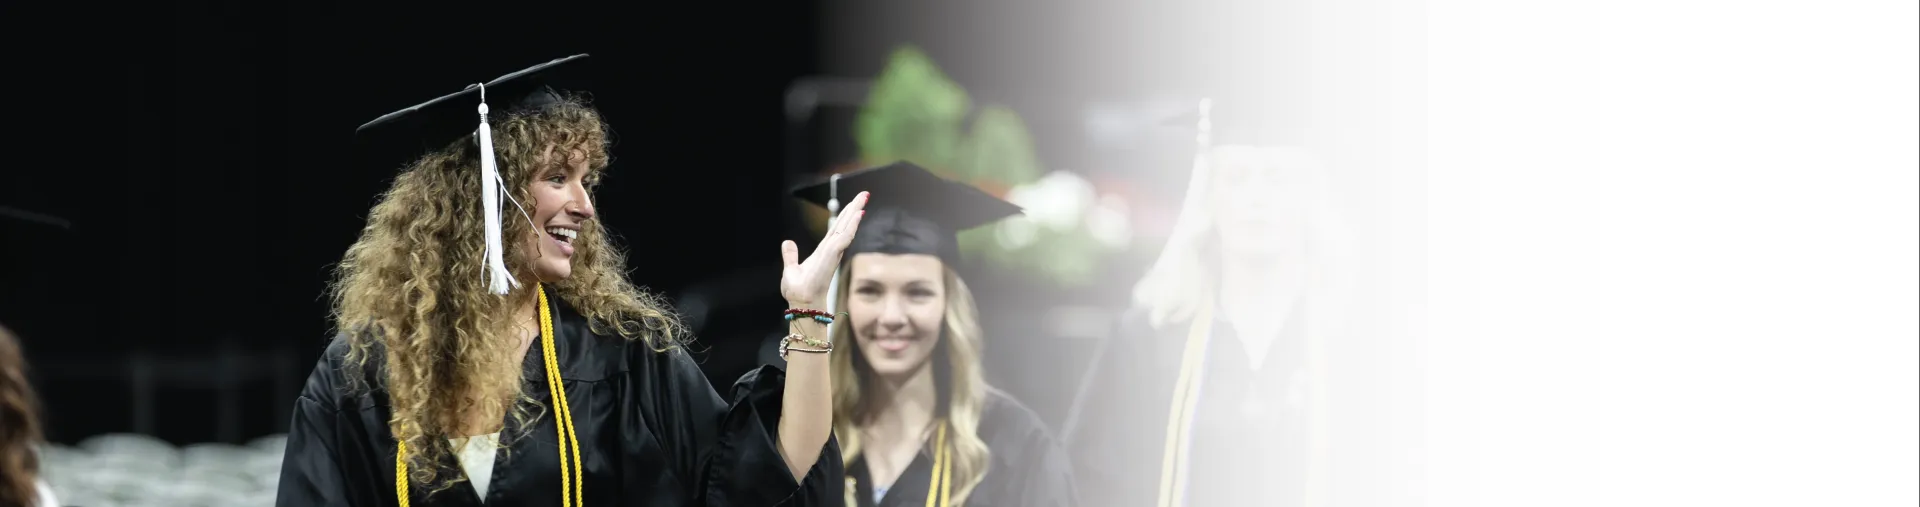 Graduate waving during commencement ceremony.